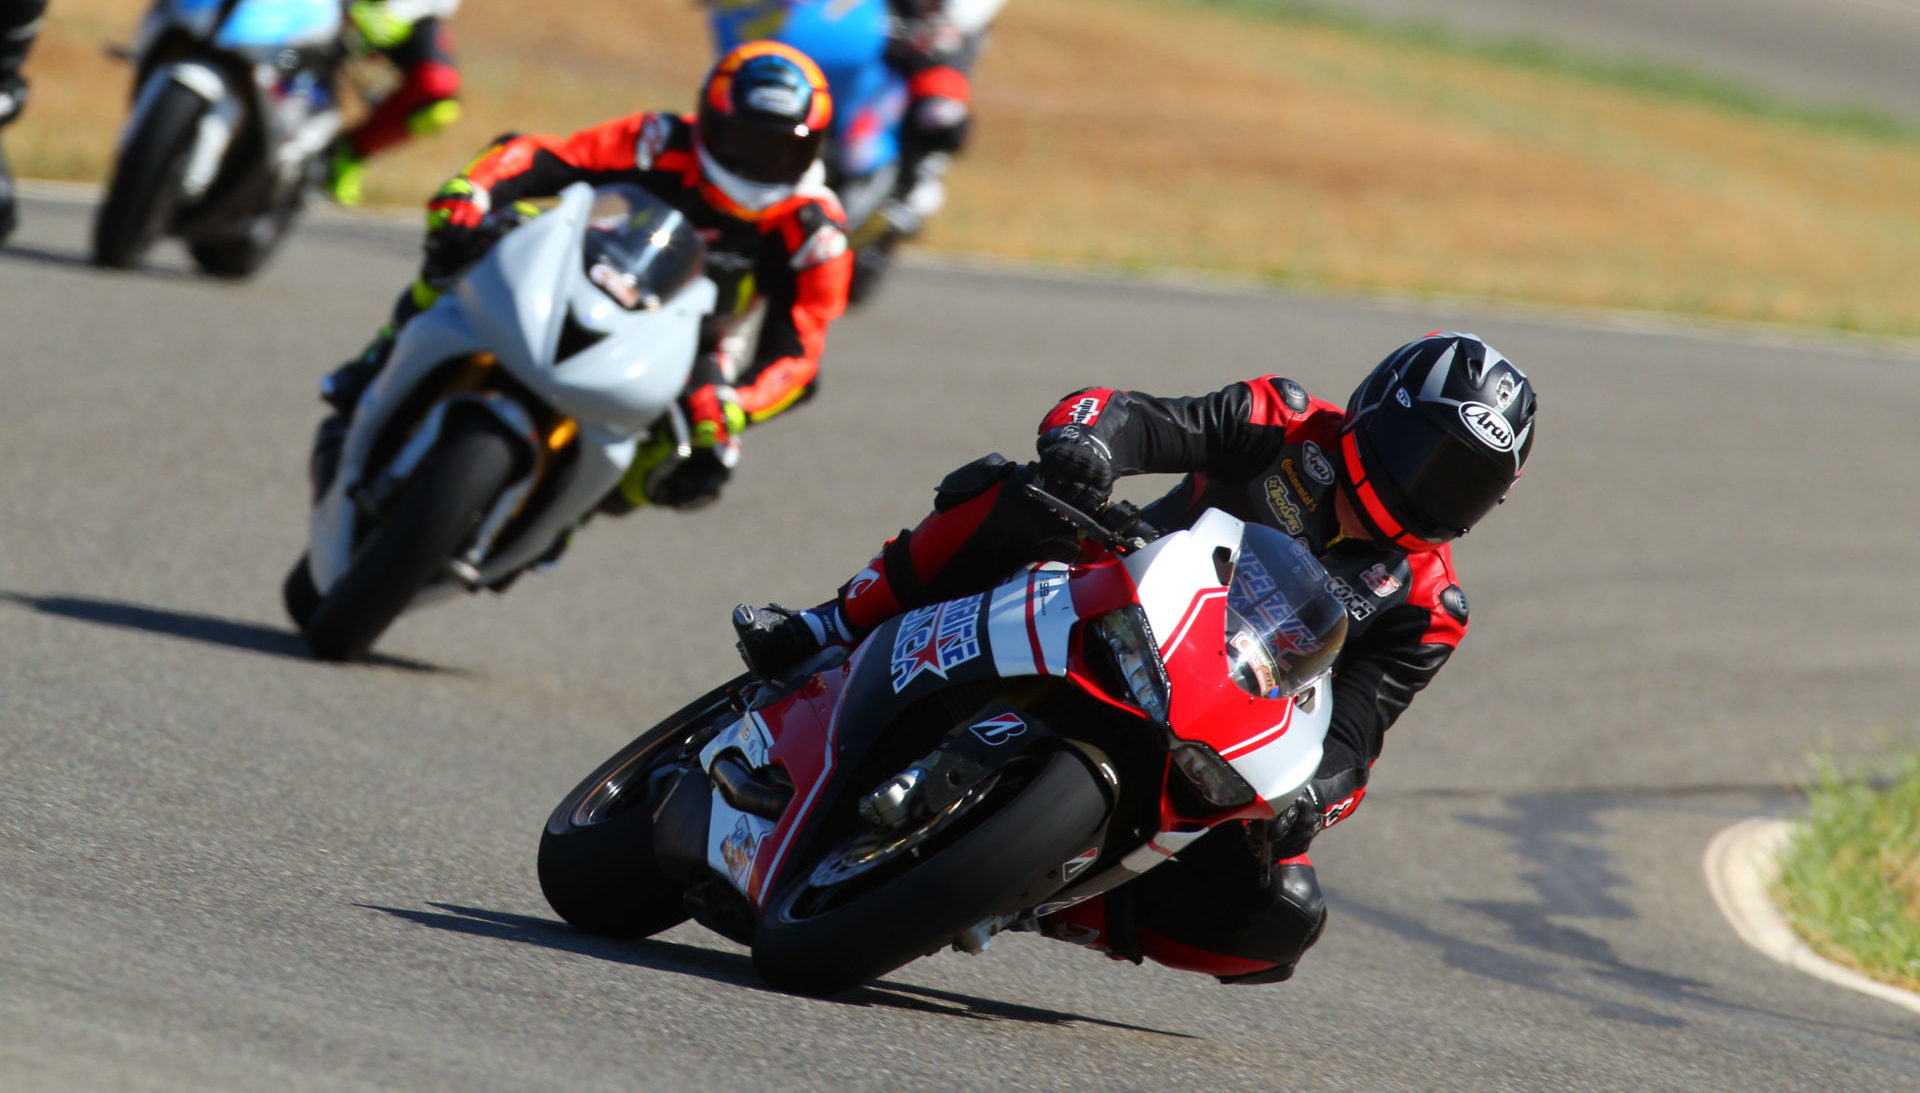 Action from a Superbike-Coach event. Photo courtesy Superbike-Coach.